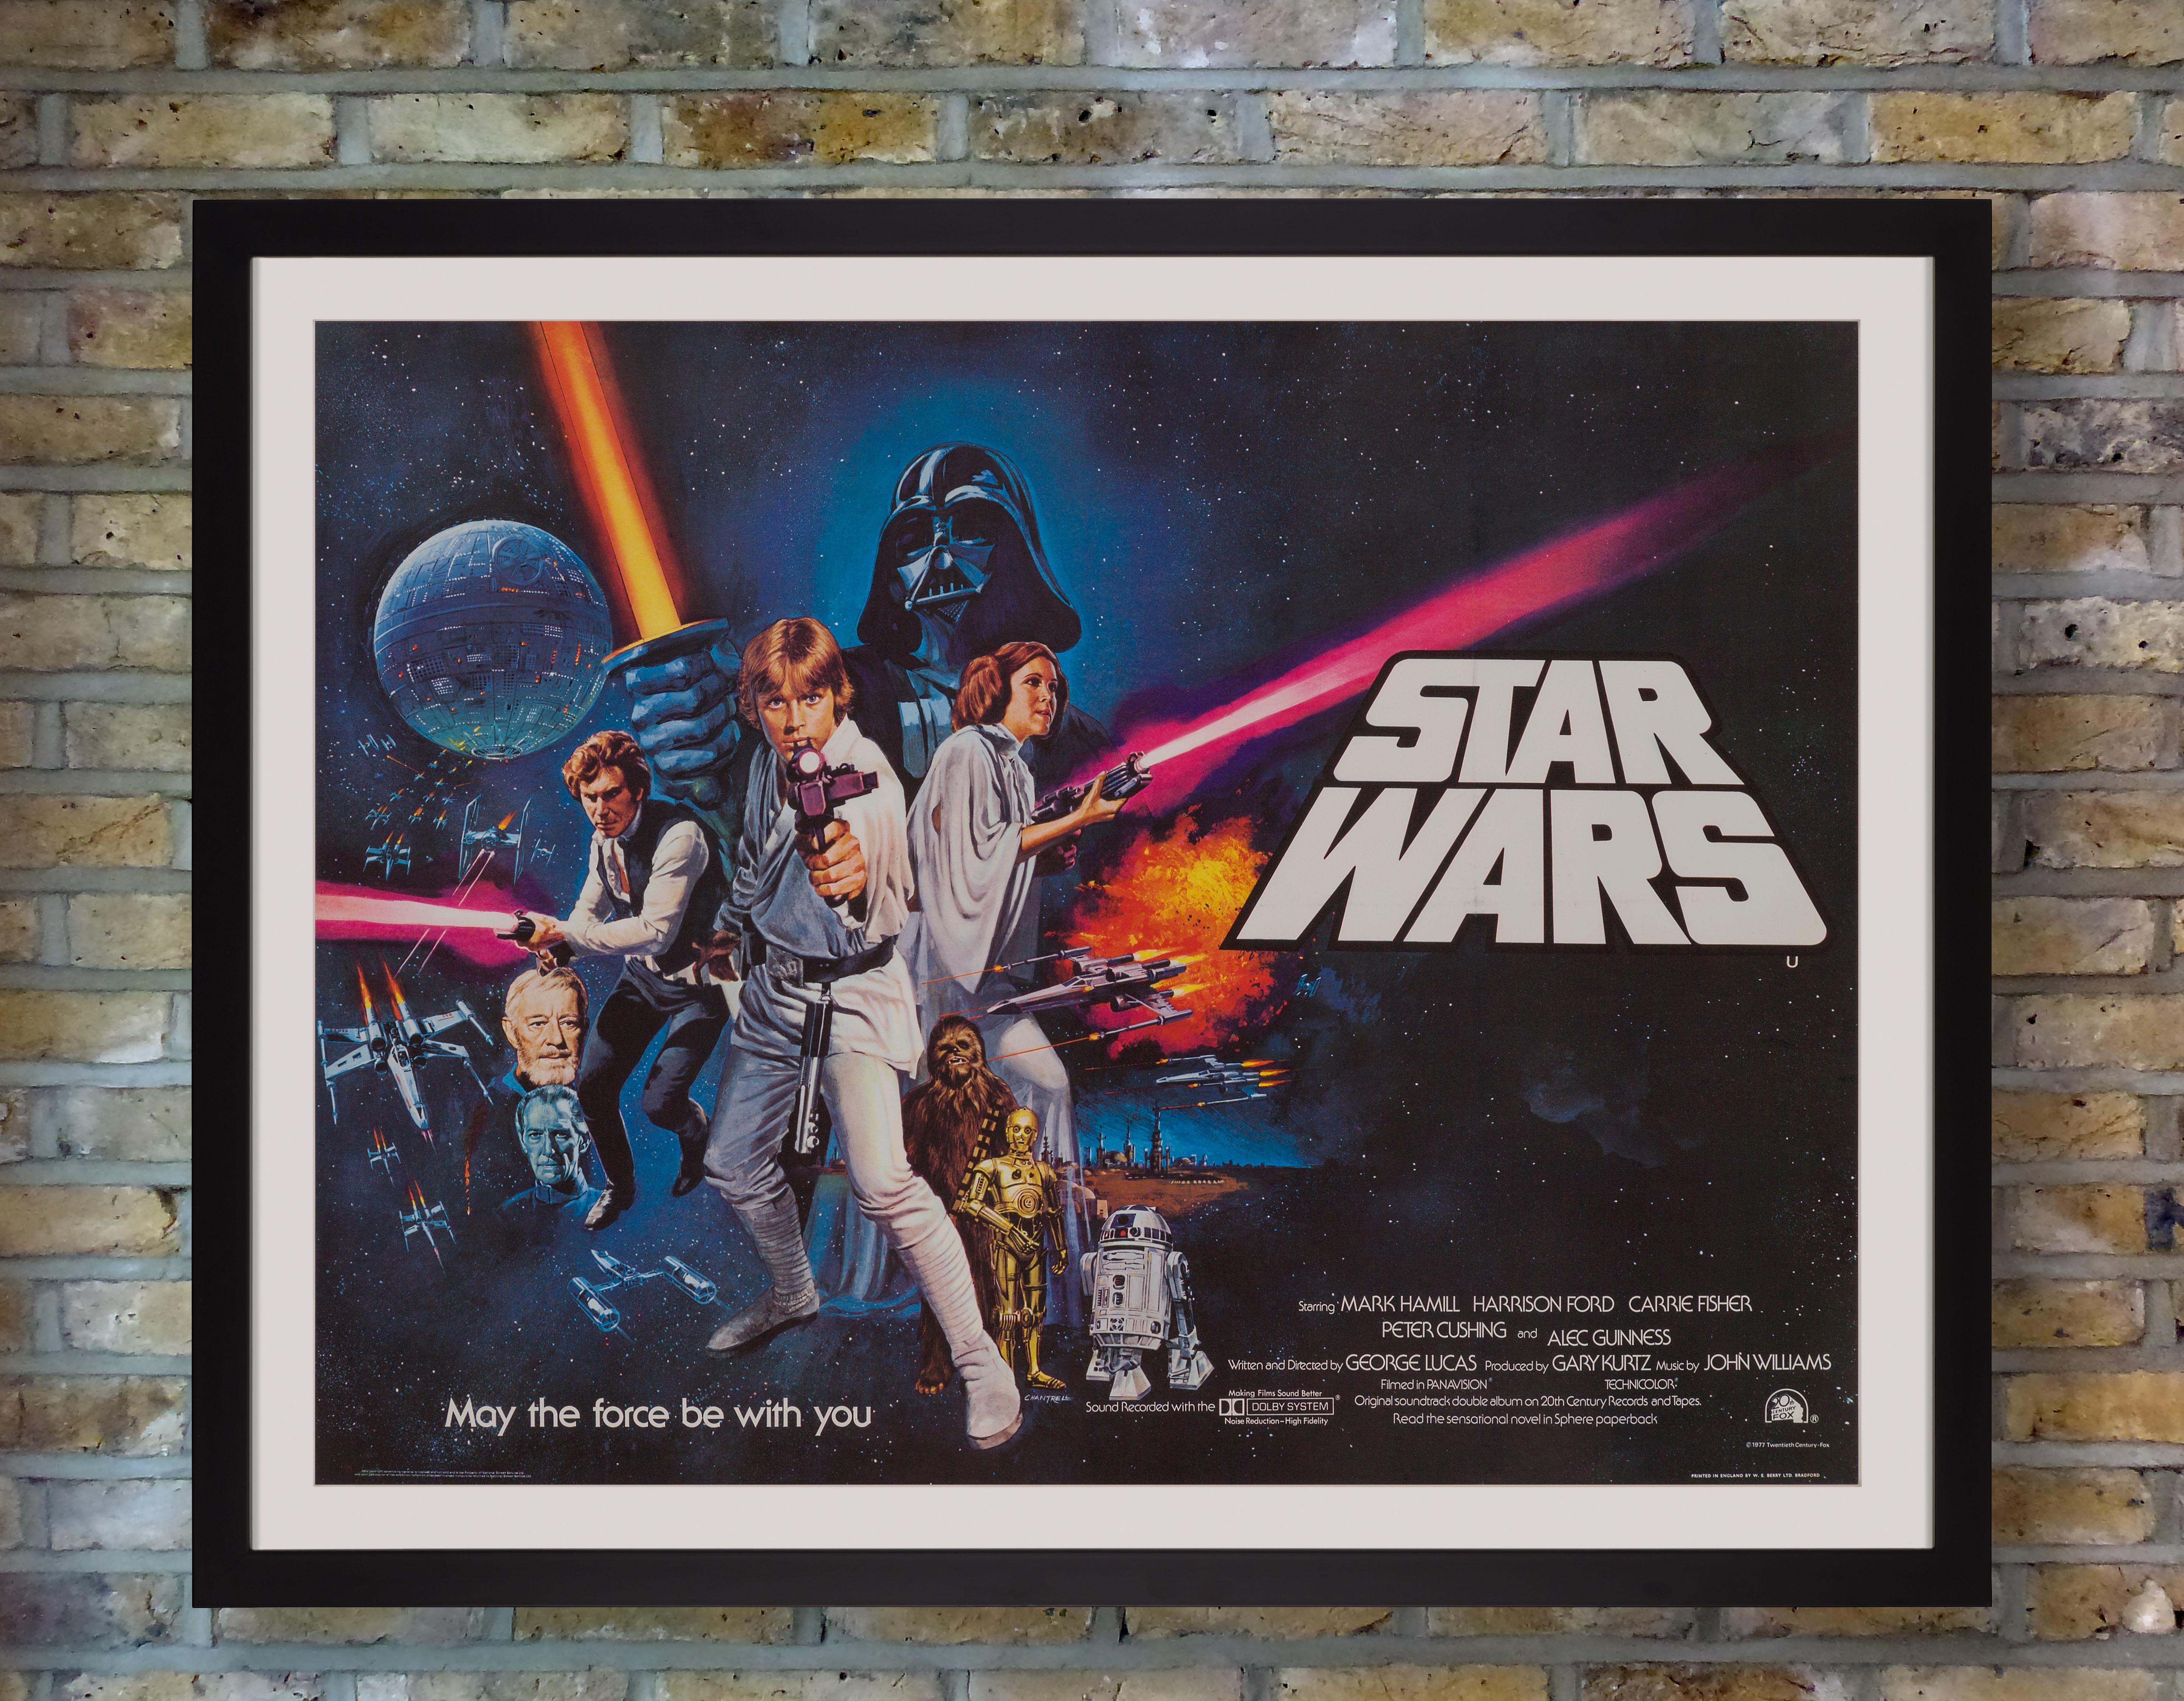 A rare British quad for the first instalment of George Lucas' original, genre-defining, sci-fi trilogy 'Star Wars,' in excellent condition. When the studio realized how successful the first film was going to be, they commissioned Tom Chantrell to